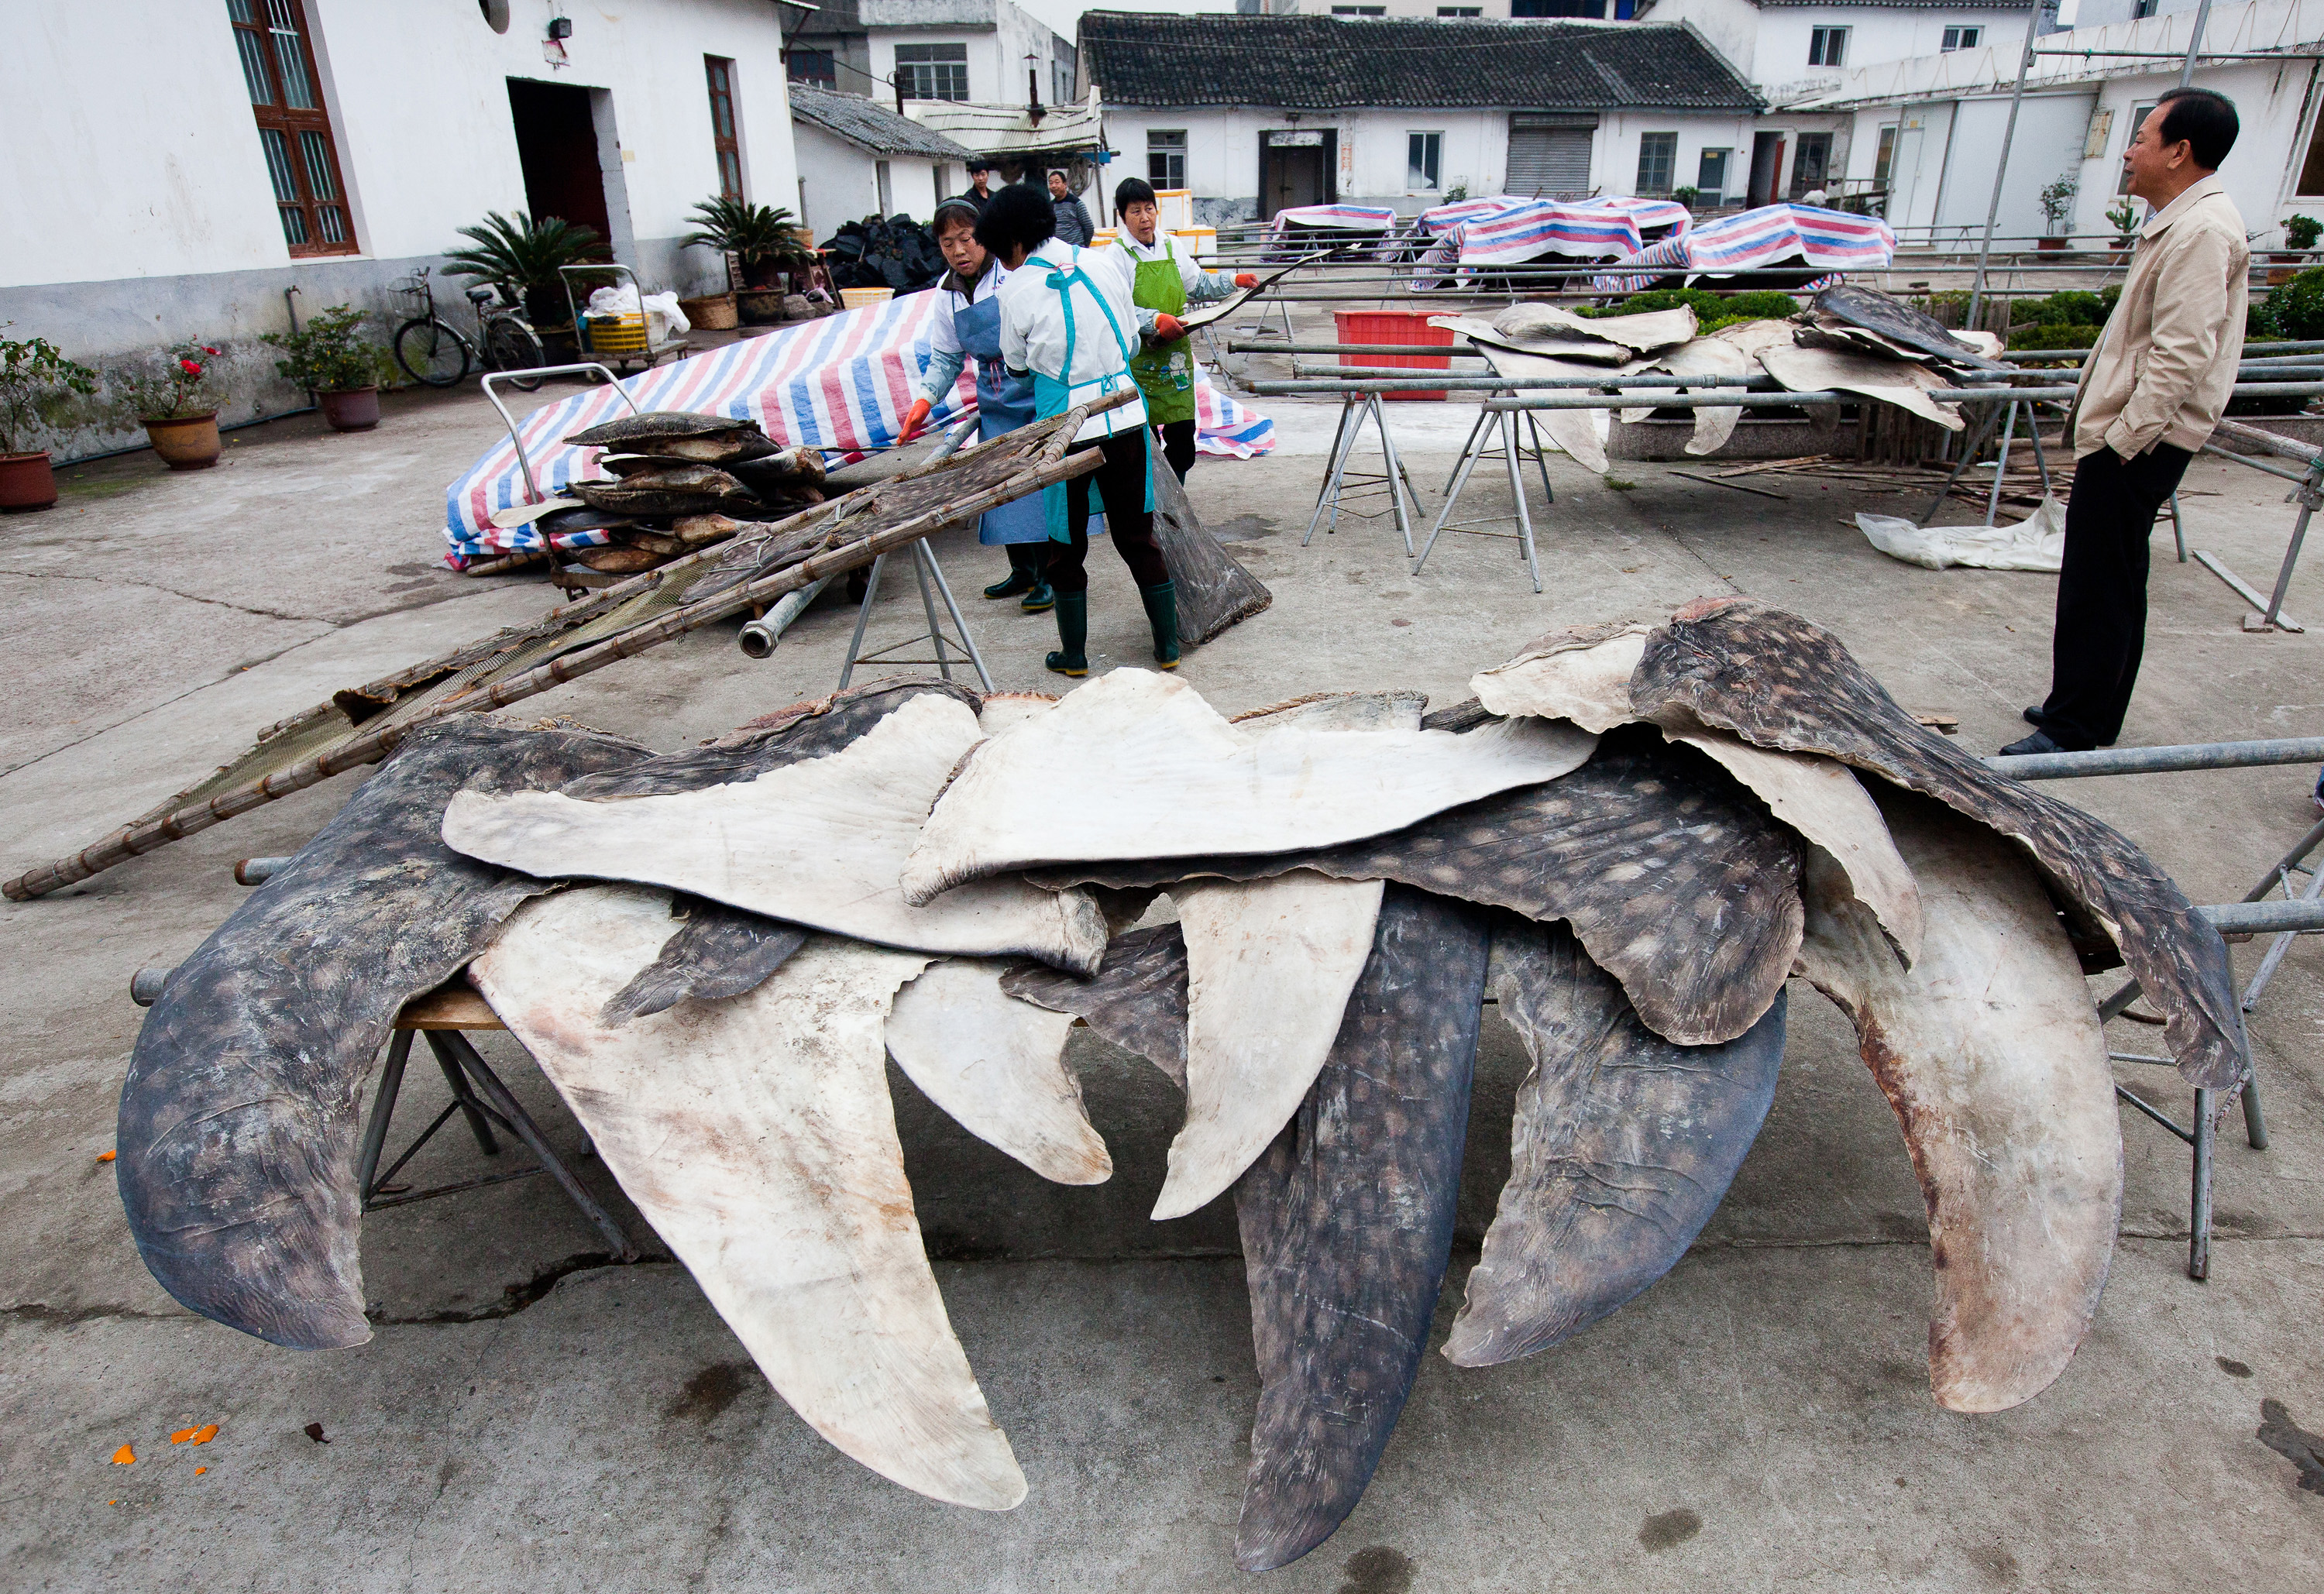 Whale-shark fins are dried and stacked for export at a processing plant in Puqi, Zhejiang province, China (Hilton/Hofford for WildLifeRisk)